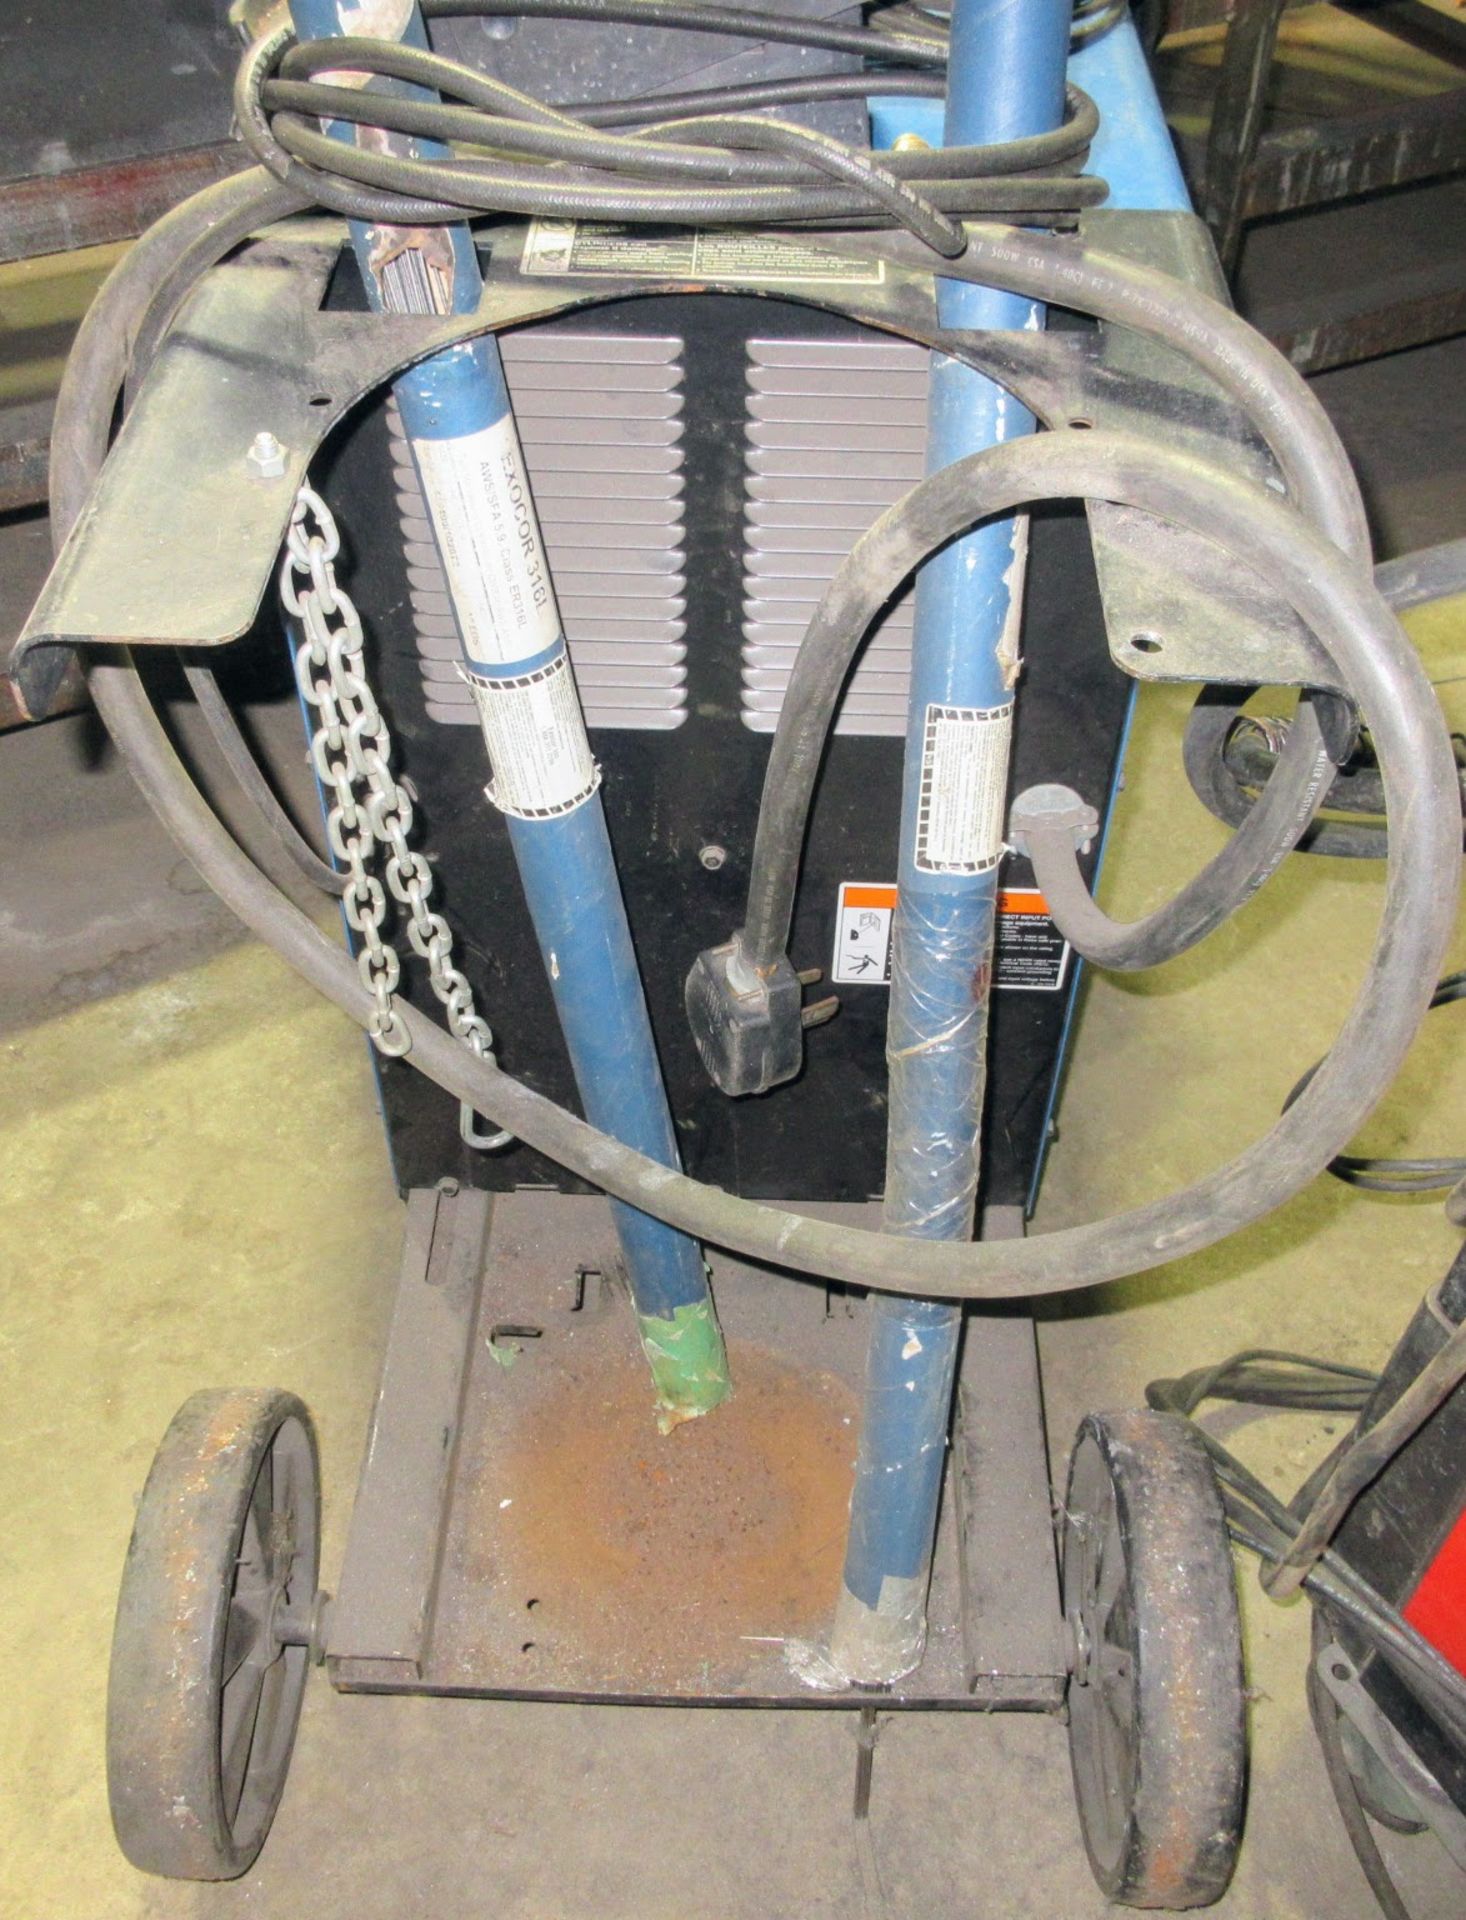 MILLER SYNCROWAVE 180 SD TIG WELDER W/ CABLES, CART, FOOT CONTROL, S/N LE253102 - Image 5 of 5